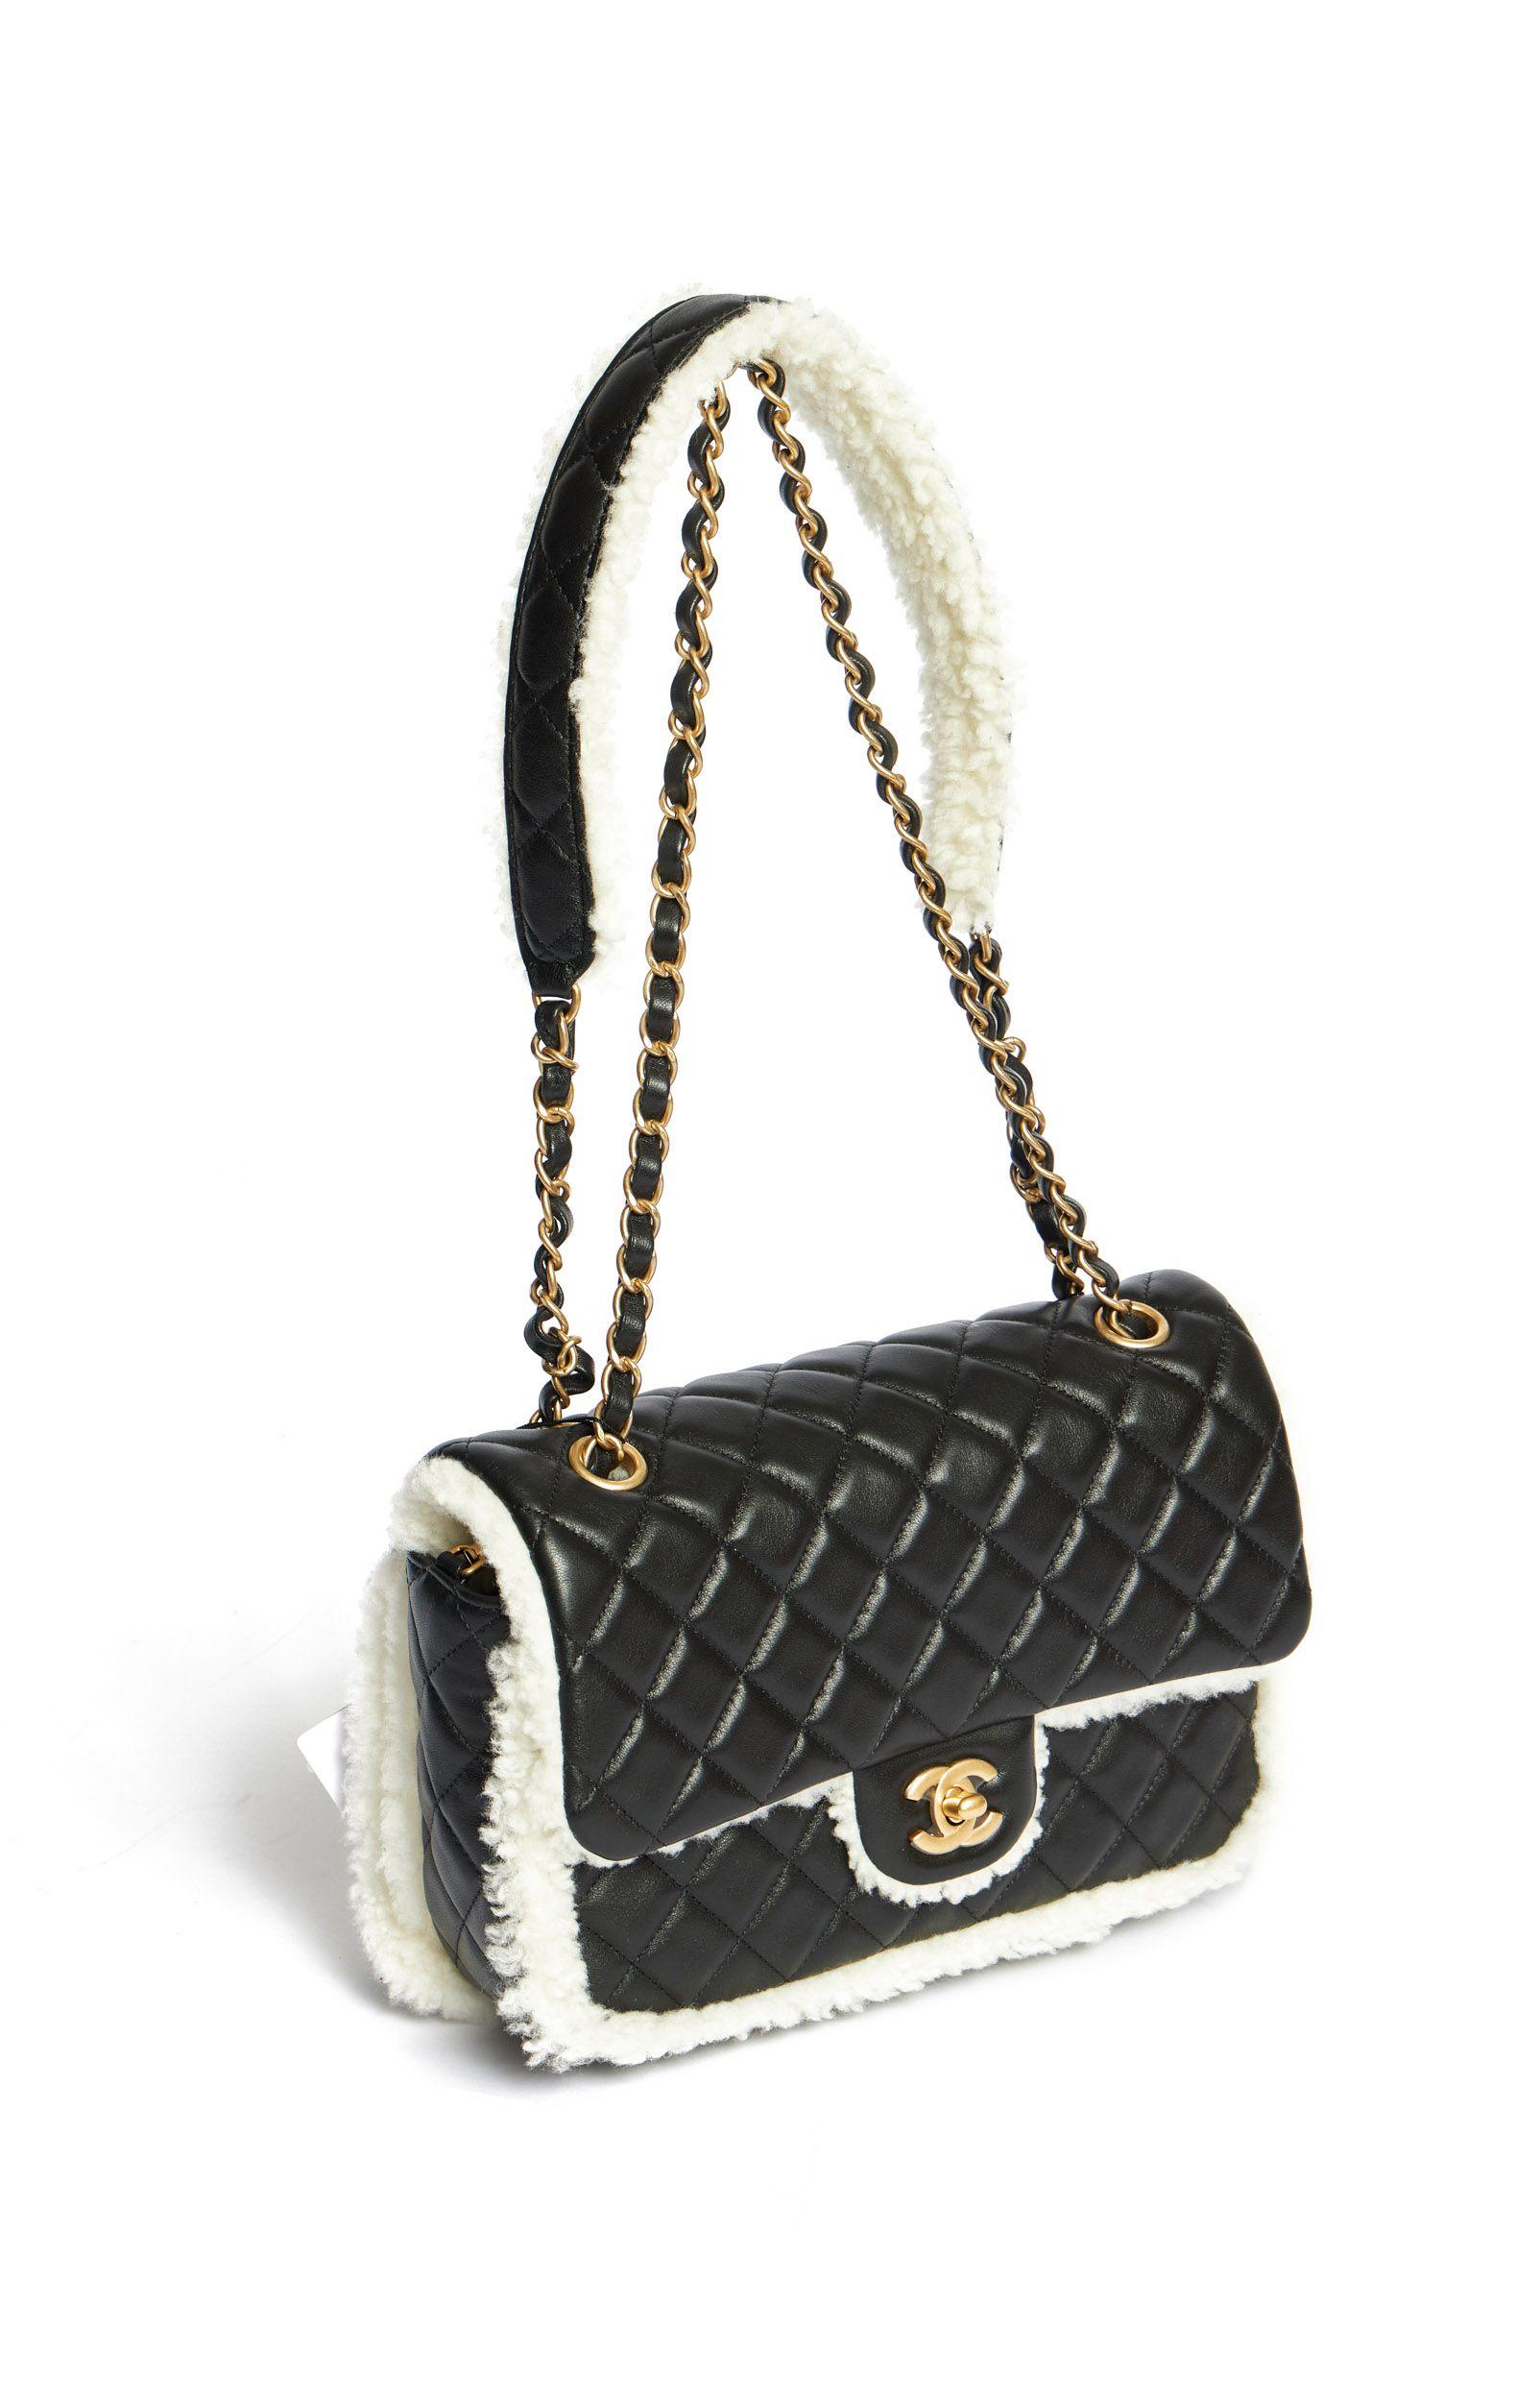 Chanel large flap bag with sheep fur on the outside trim, on the inside of the flap and partly on the shoulder chain. The bag is brand new. The time stamp shows LN1, year 2021. Even the plastic cover is still over the stamp as well as over the